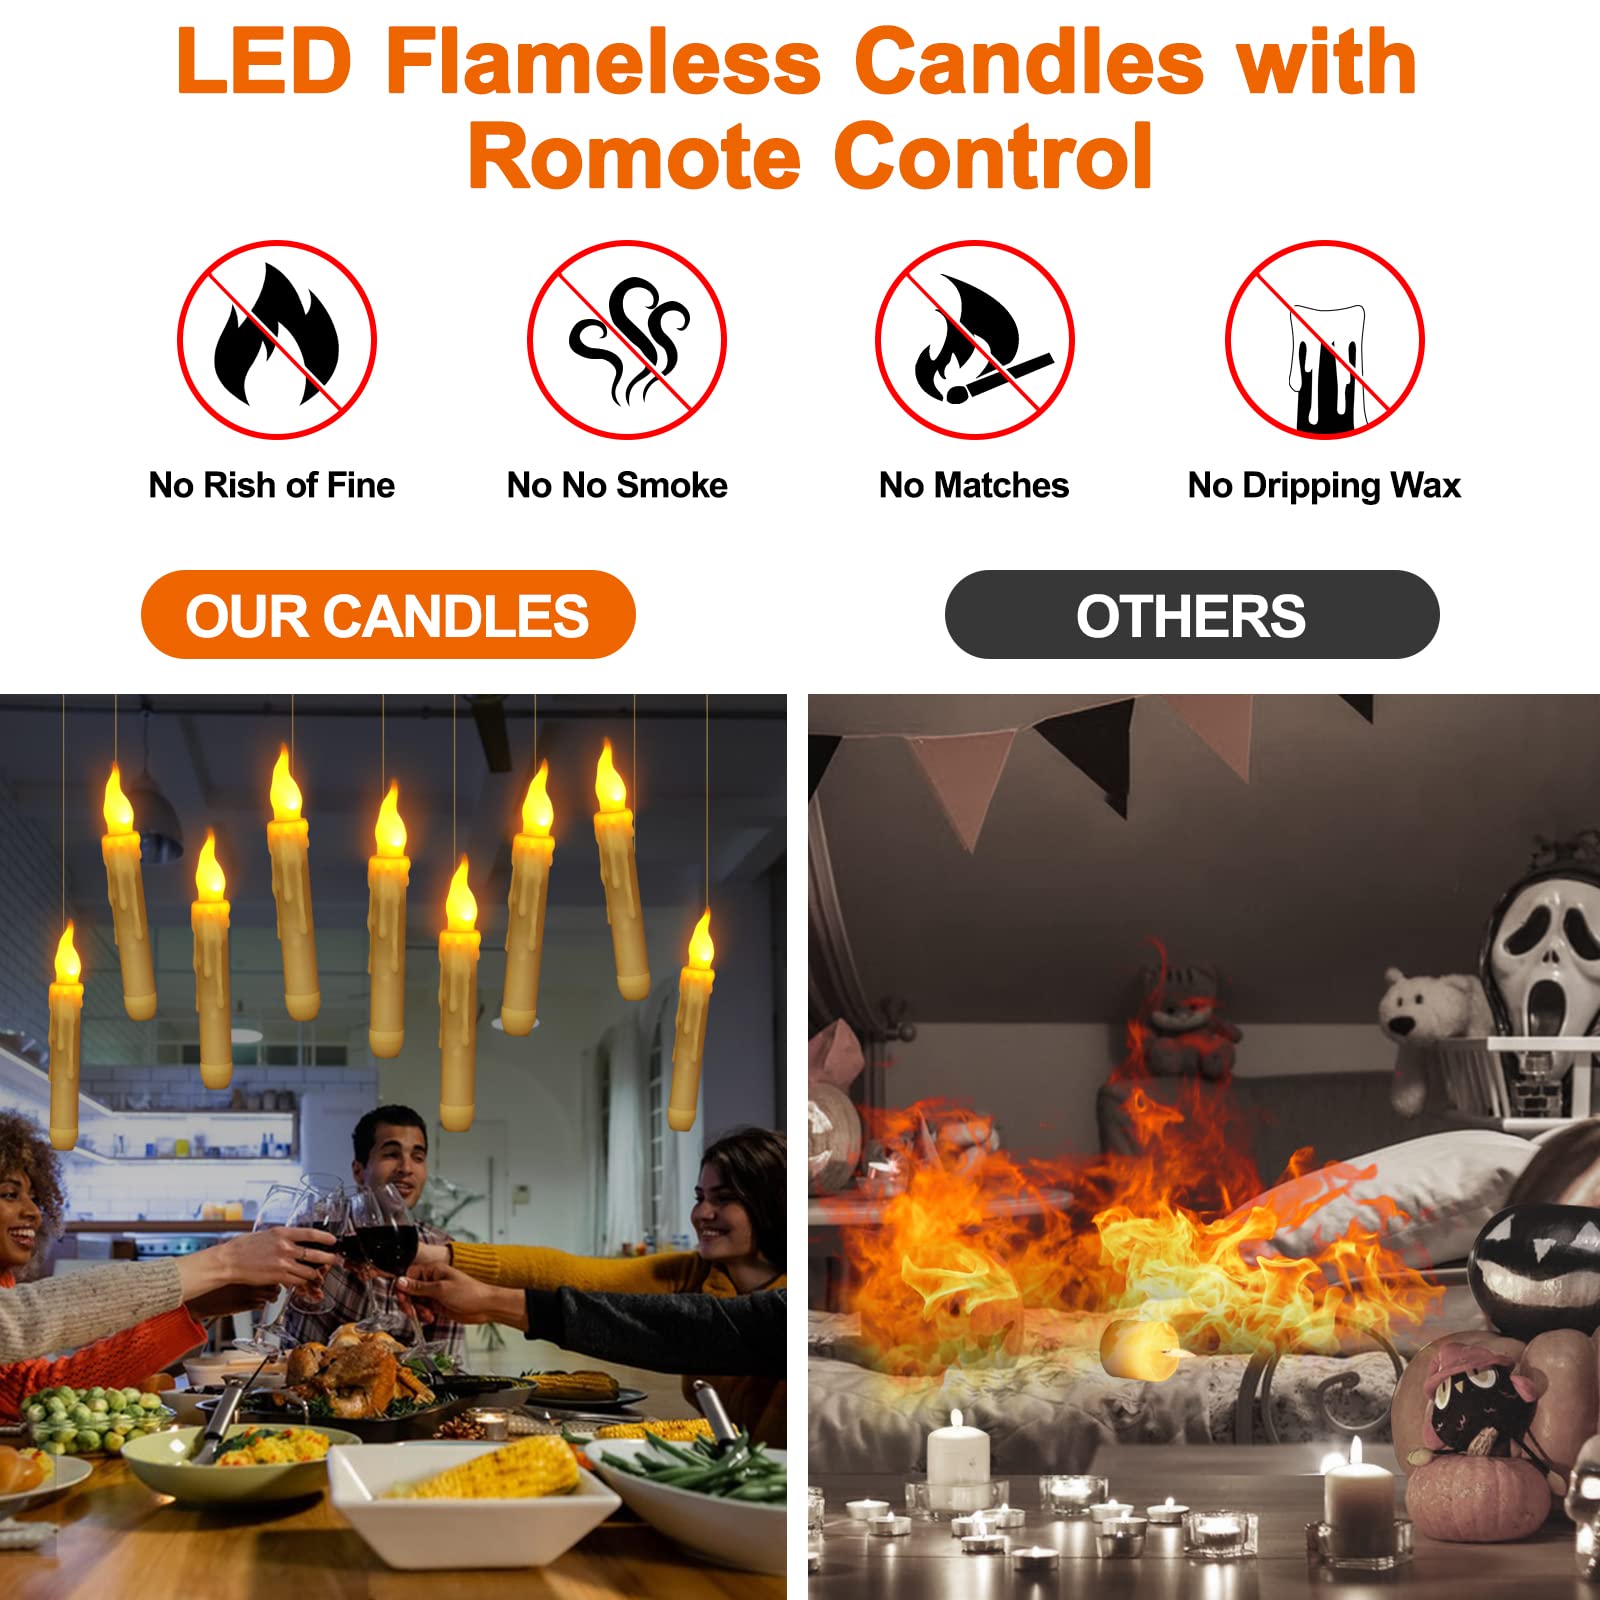 LED Floating Flameless Candles with Magic Wand Remote - Mermaid Venom